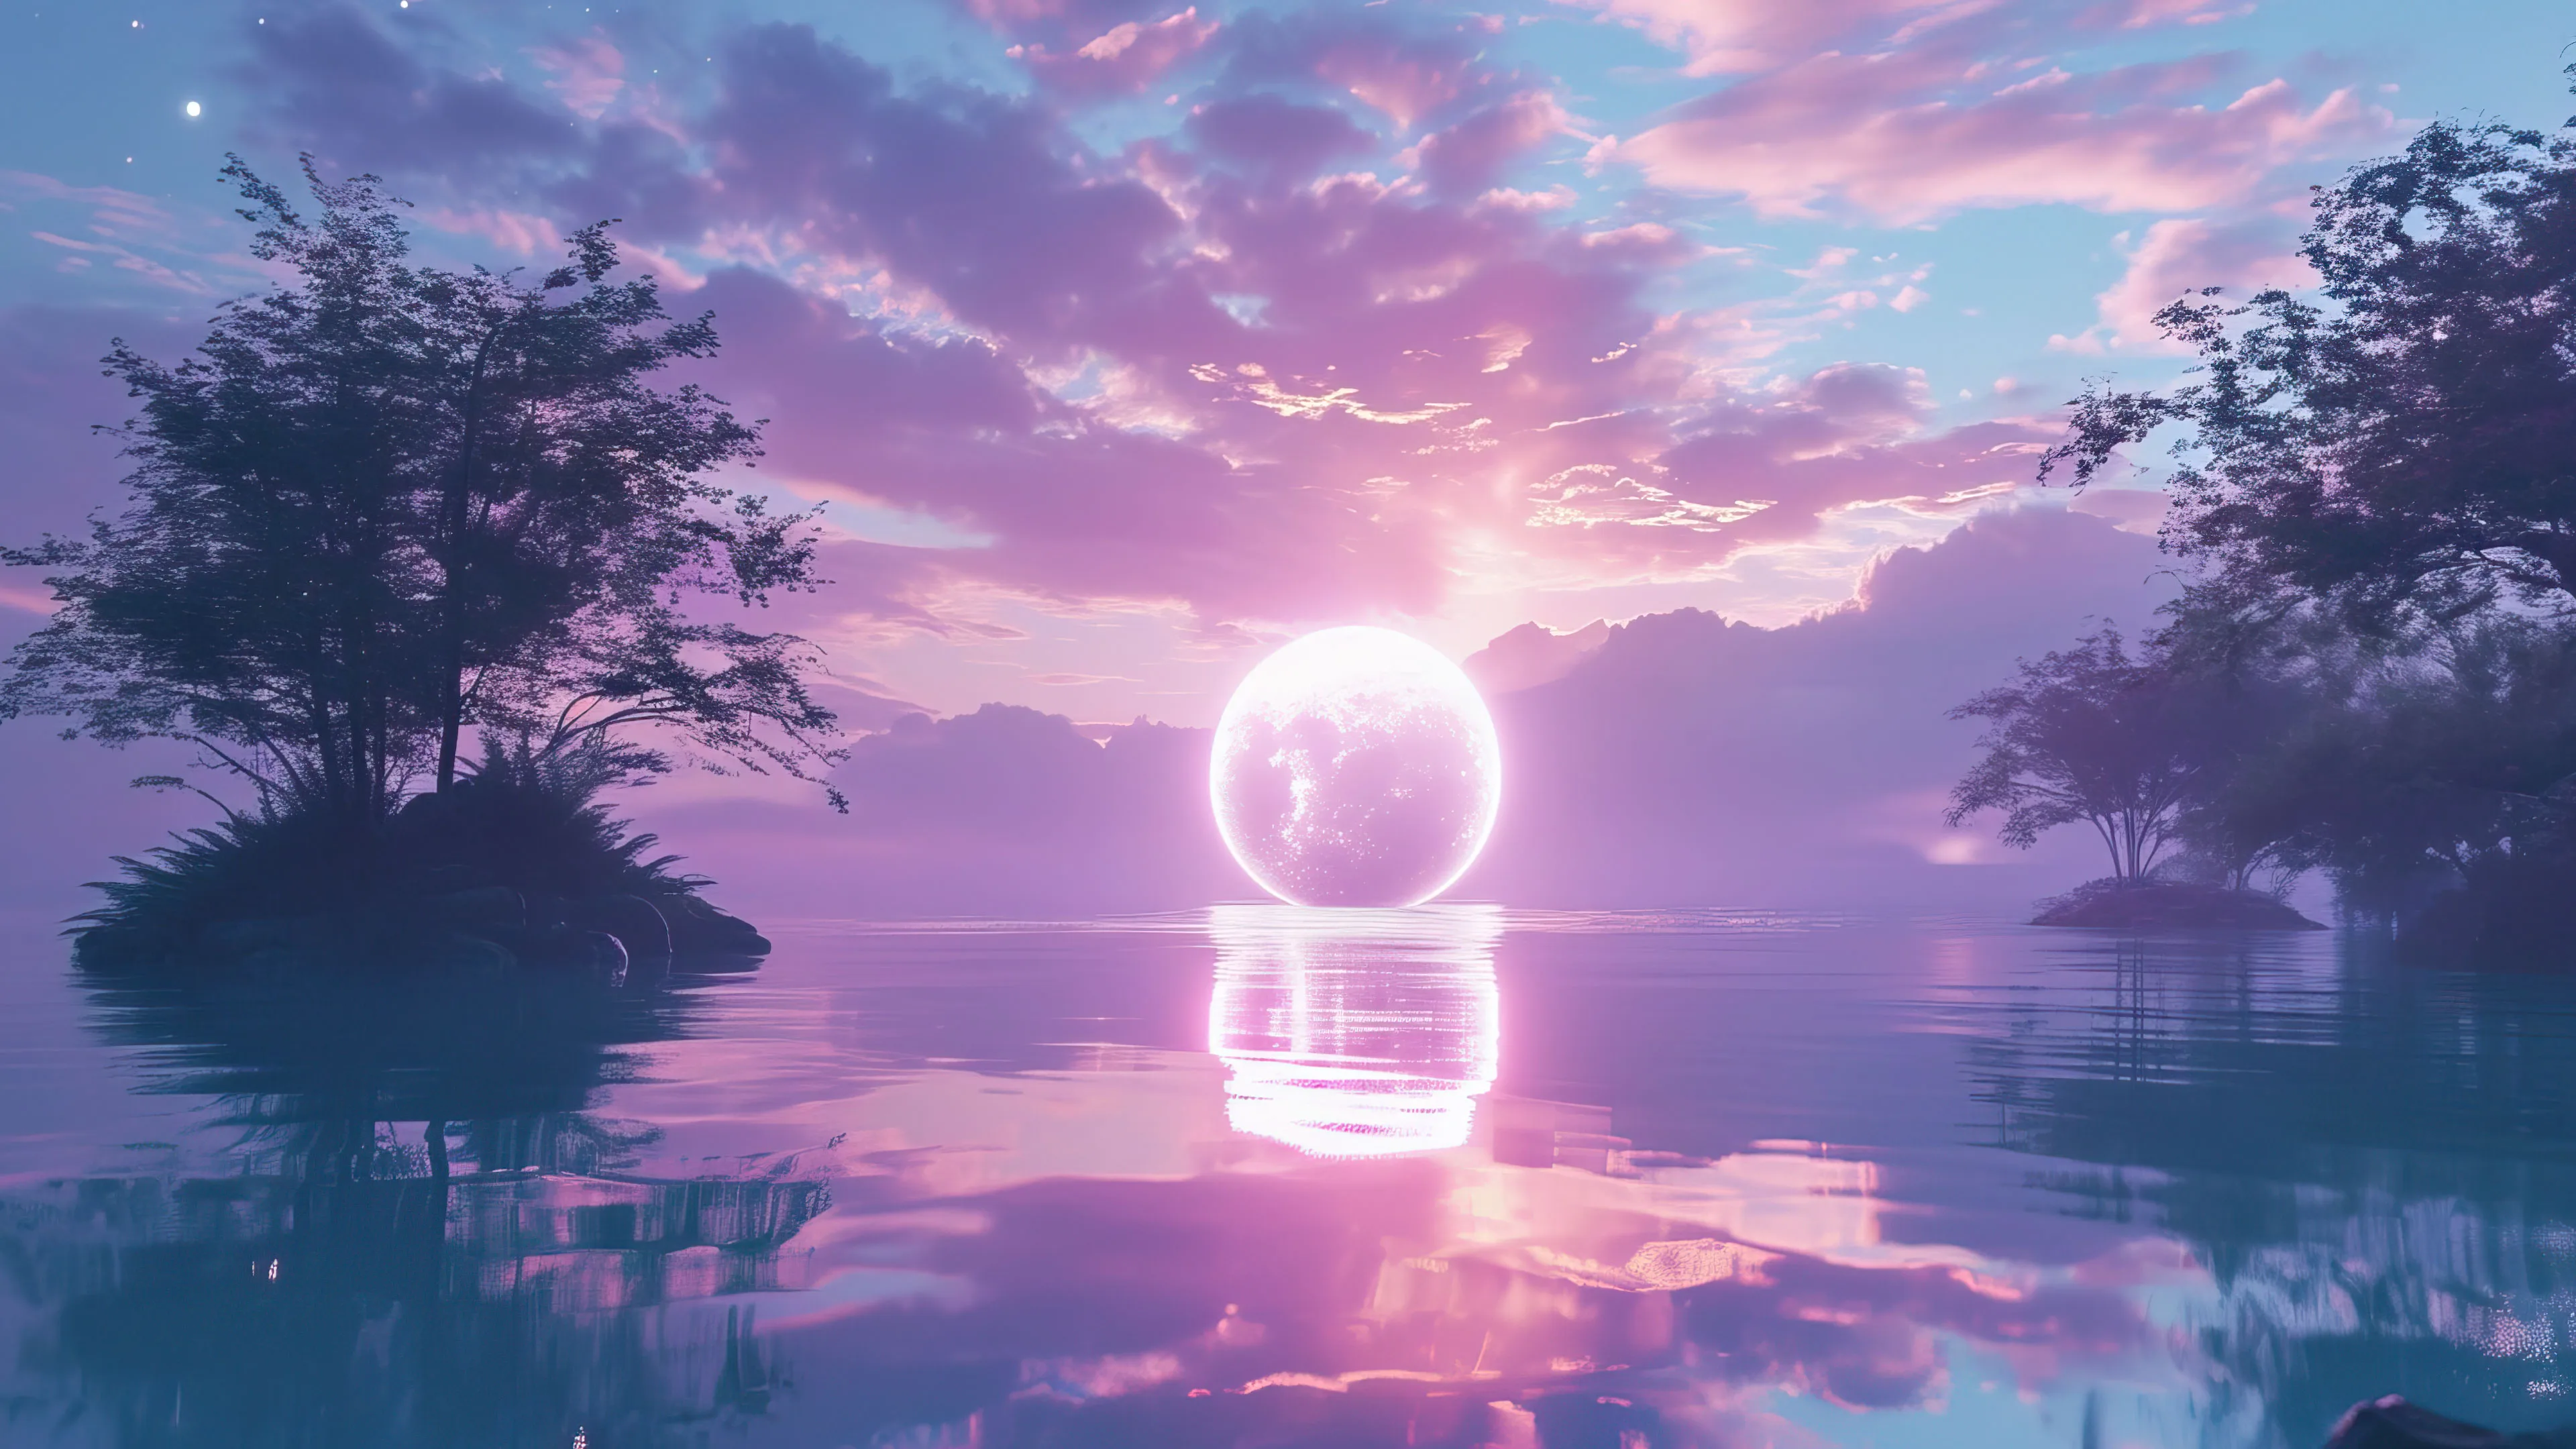 mesmerizing 4K wallpaper presents a mystical sunrise casting its golden hues over a tranquil lake, artfully generated by AI. The ethereal scene captures the serenity of dawn, with the tranquil lake reflecting the radiant colors.